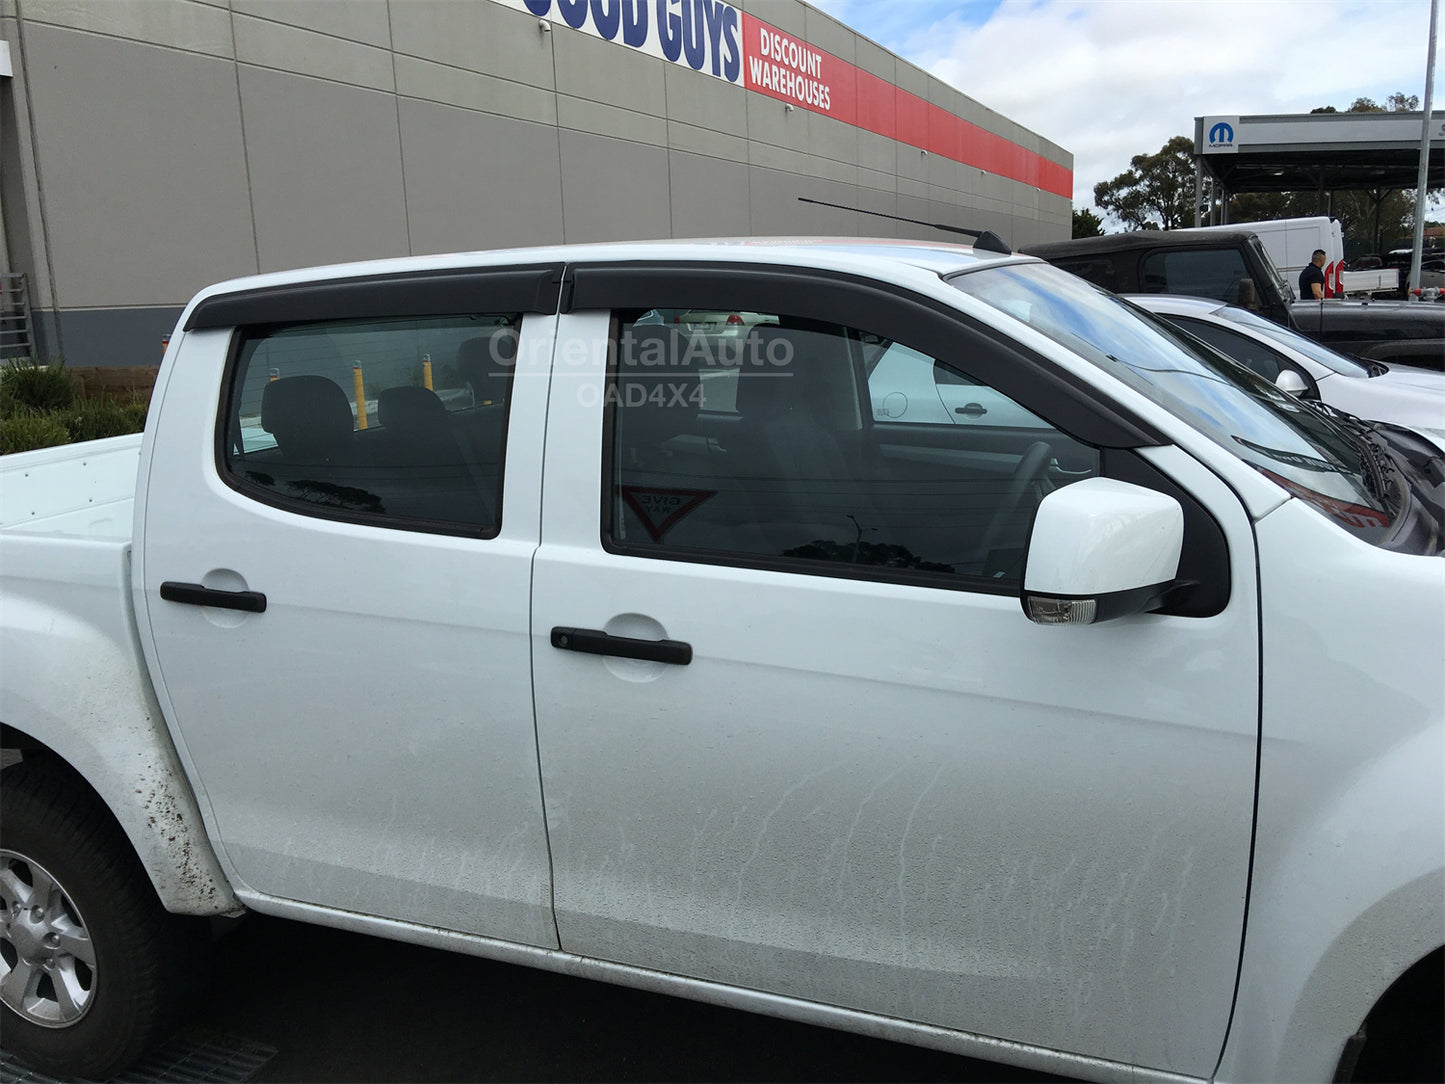 Bonnet Protector & Injection Weathershields Weather Shields Window Visors for Holden Colorado  RG Series Dual Cab 2016+